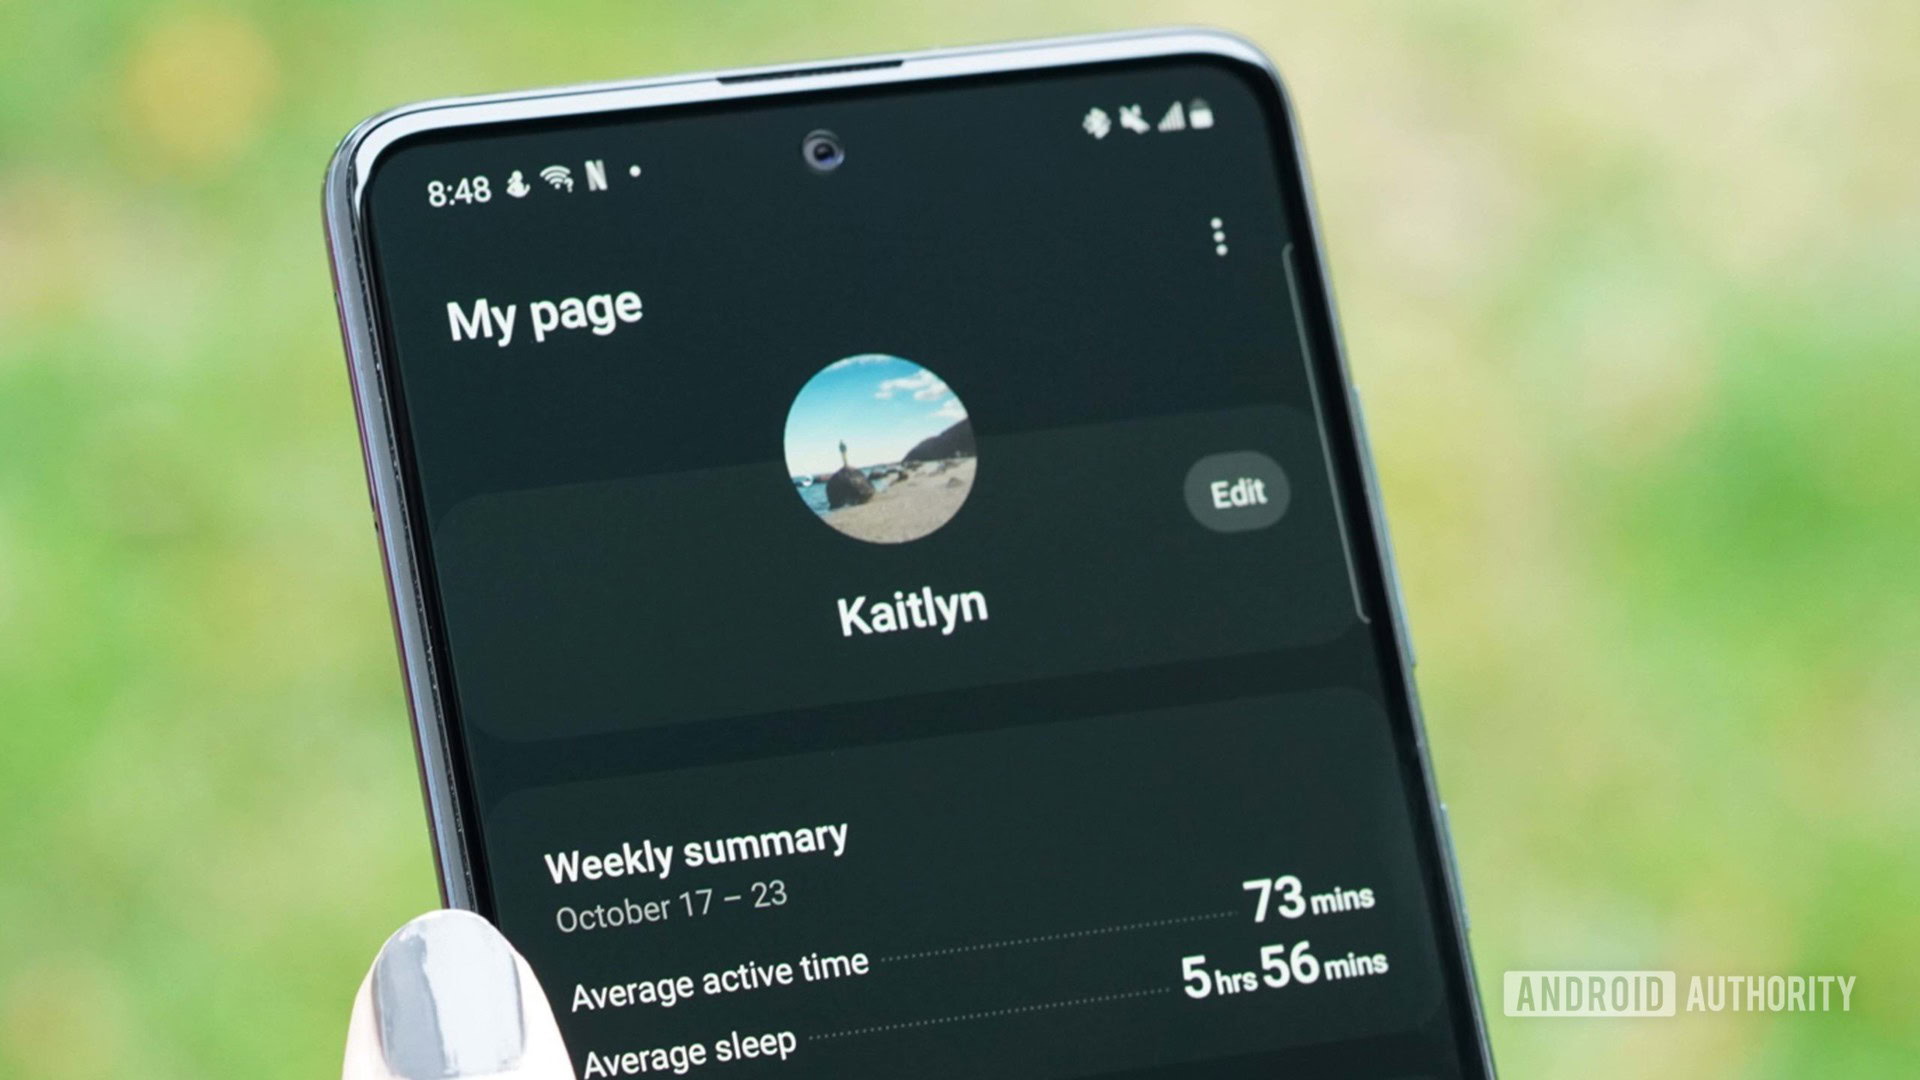 A Samsung Galaxy A51 displays the My page screen in the Samsung Health app.